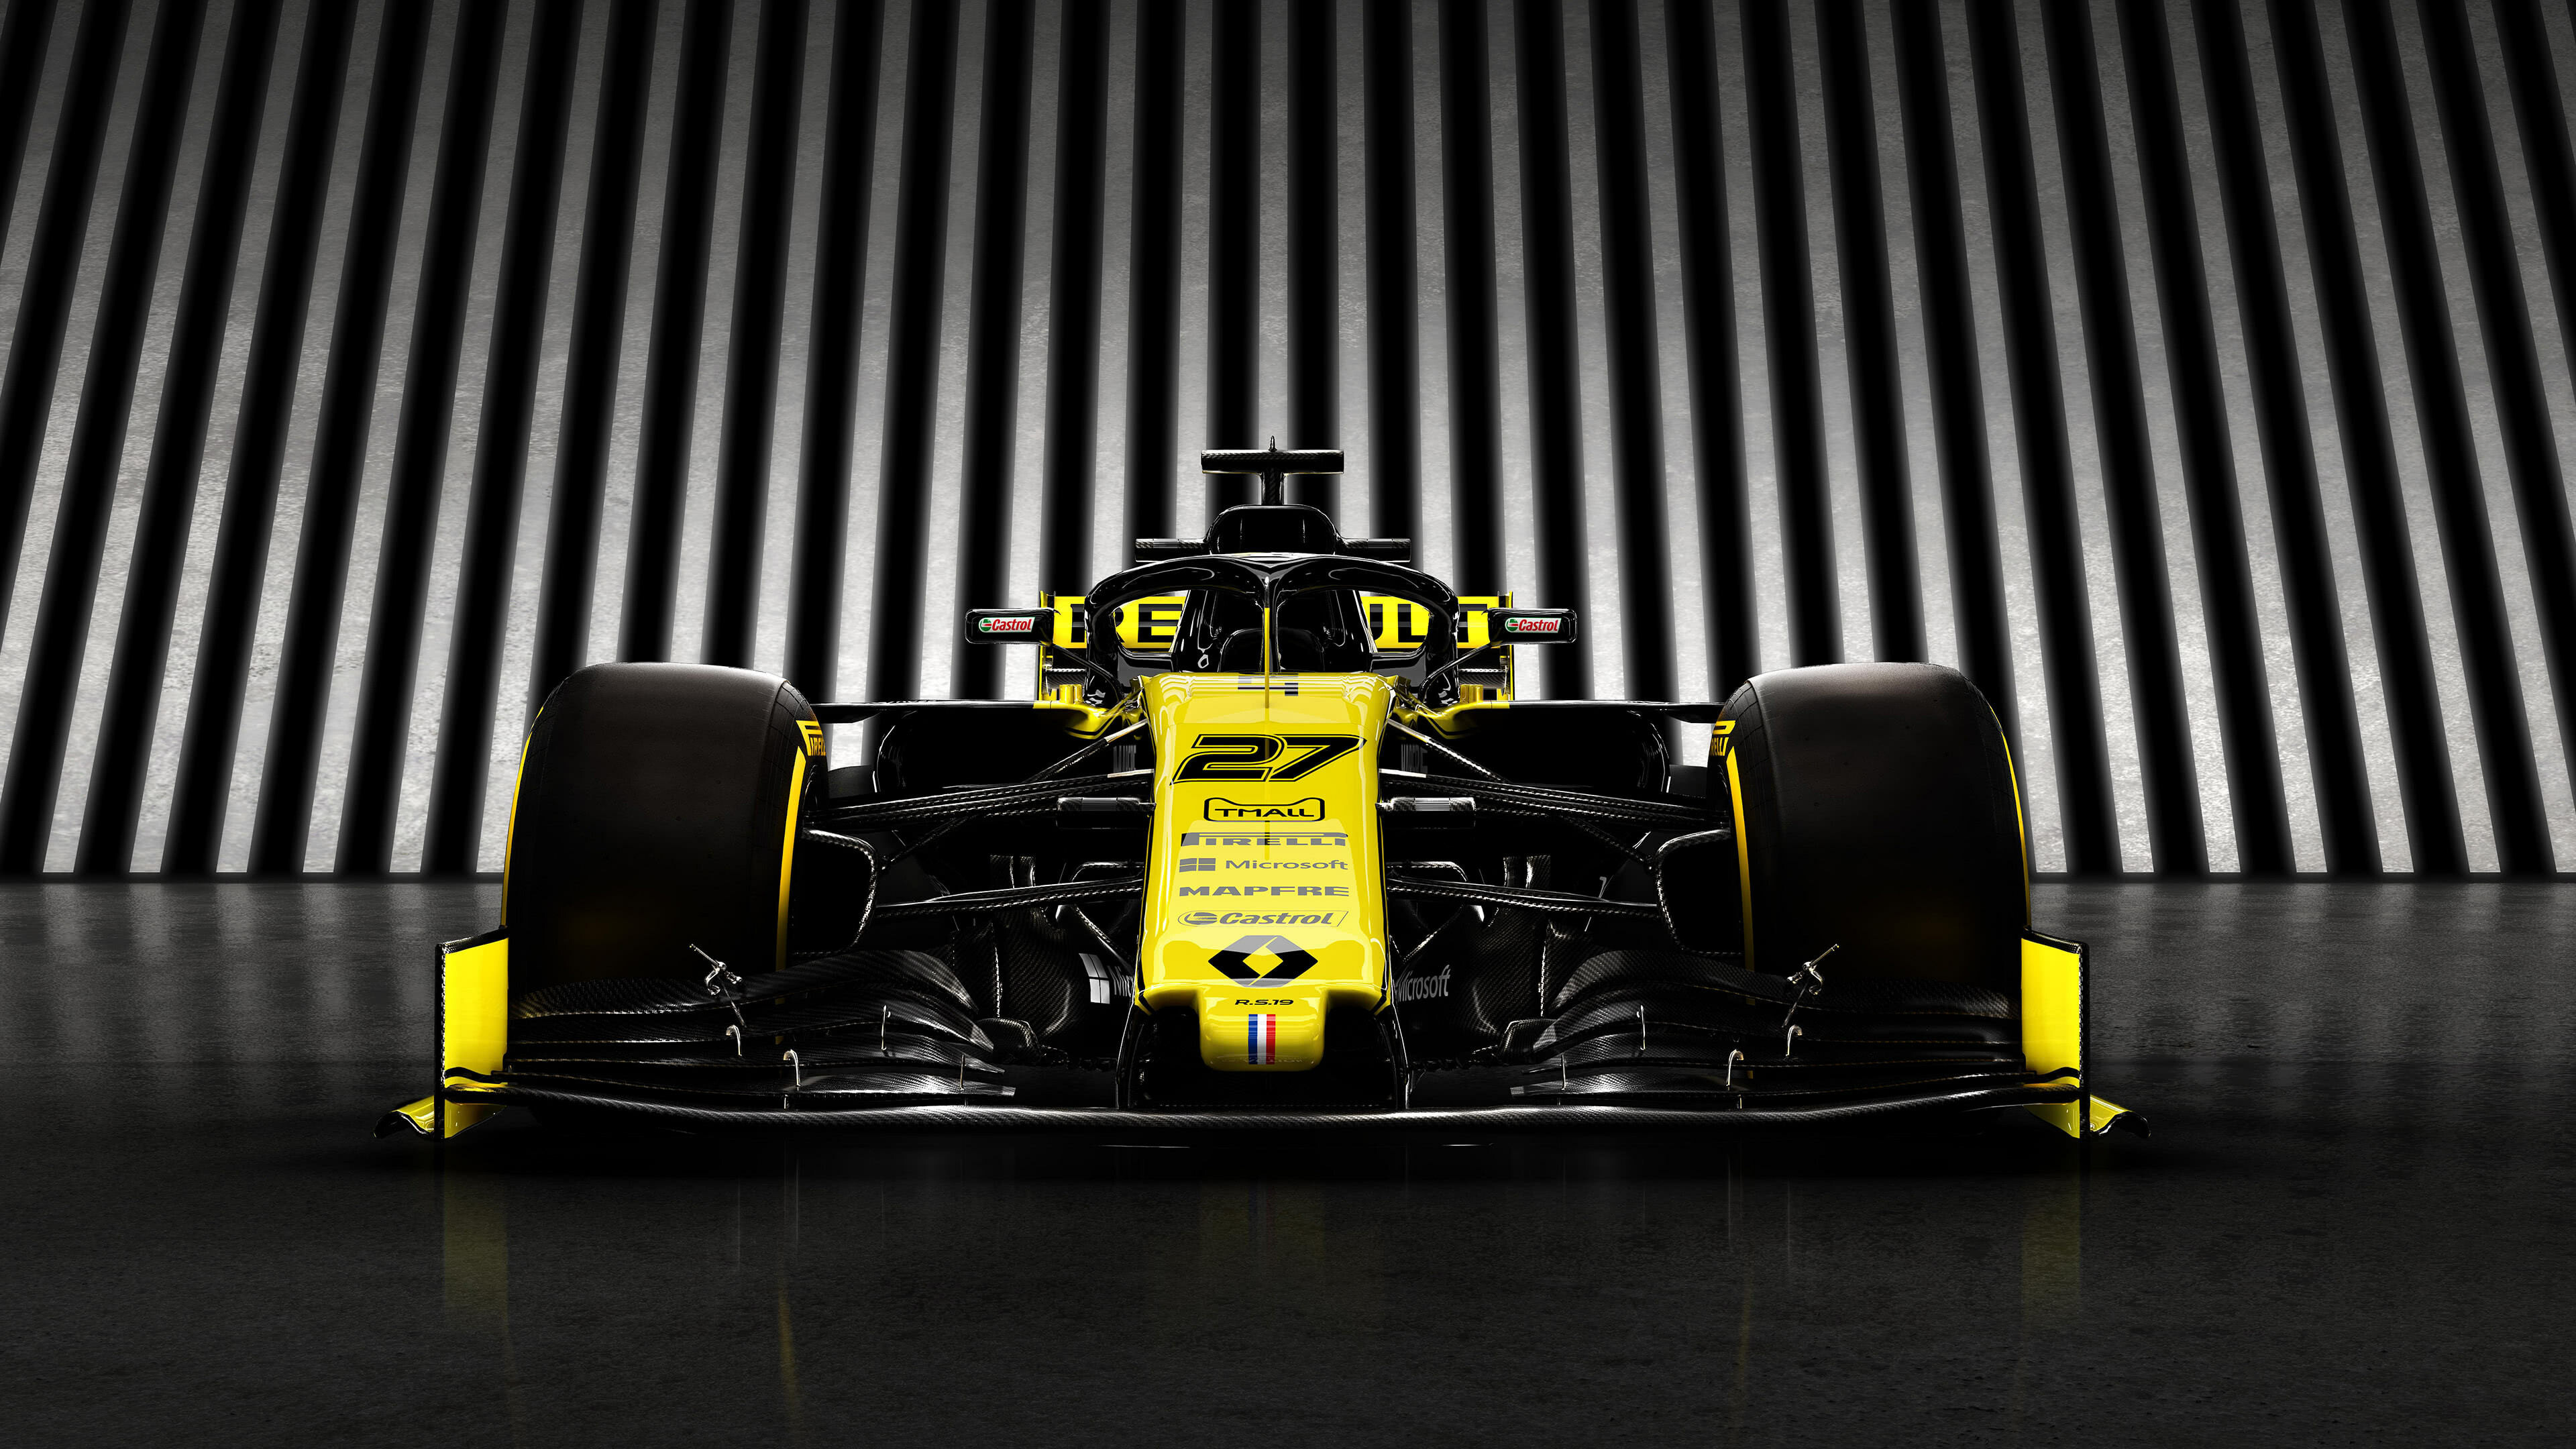 Renault: RS19, A Formula One racing car designed and constructed by a French manufacturer to compete during the 2019 FIA Formula One World Championship. 3840x2160 4K Wallpaper.